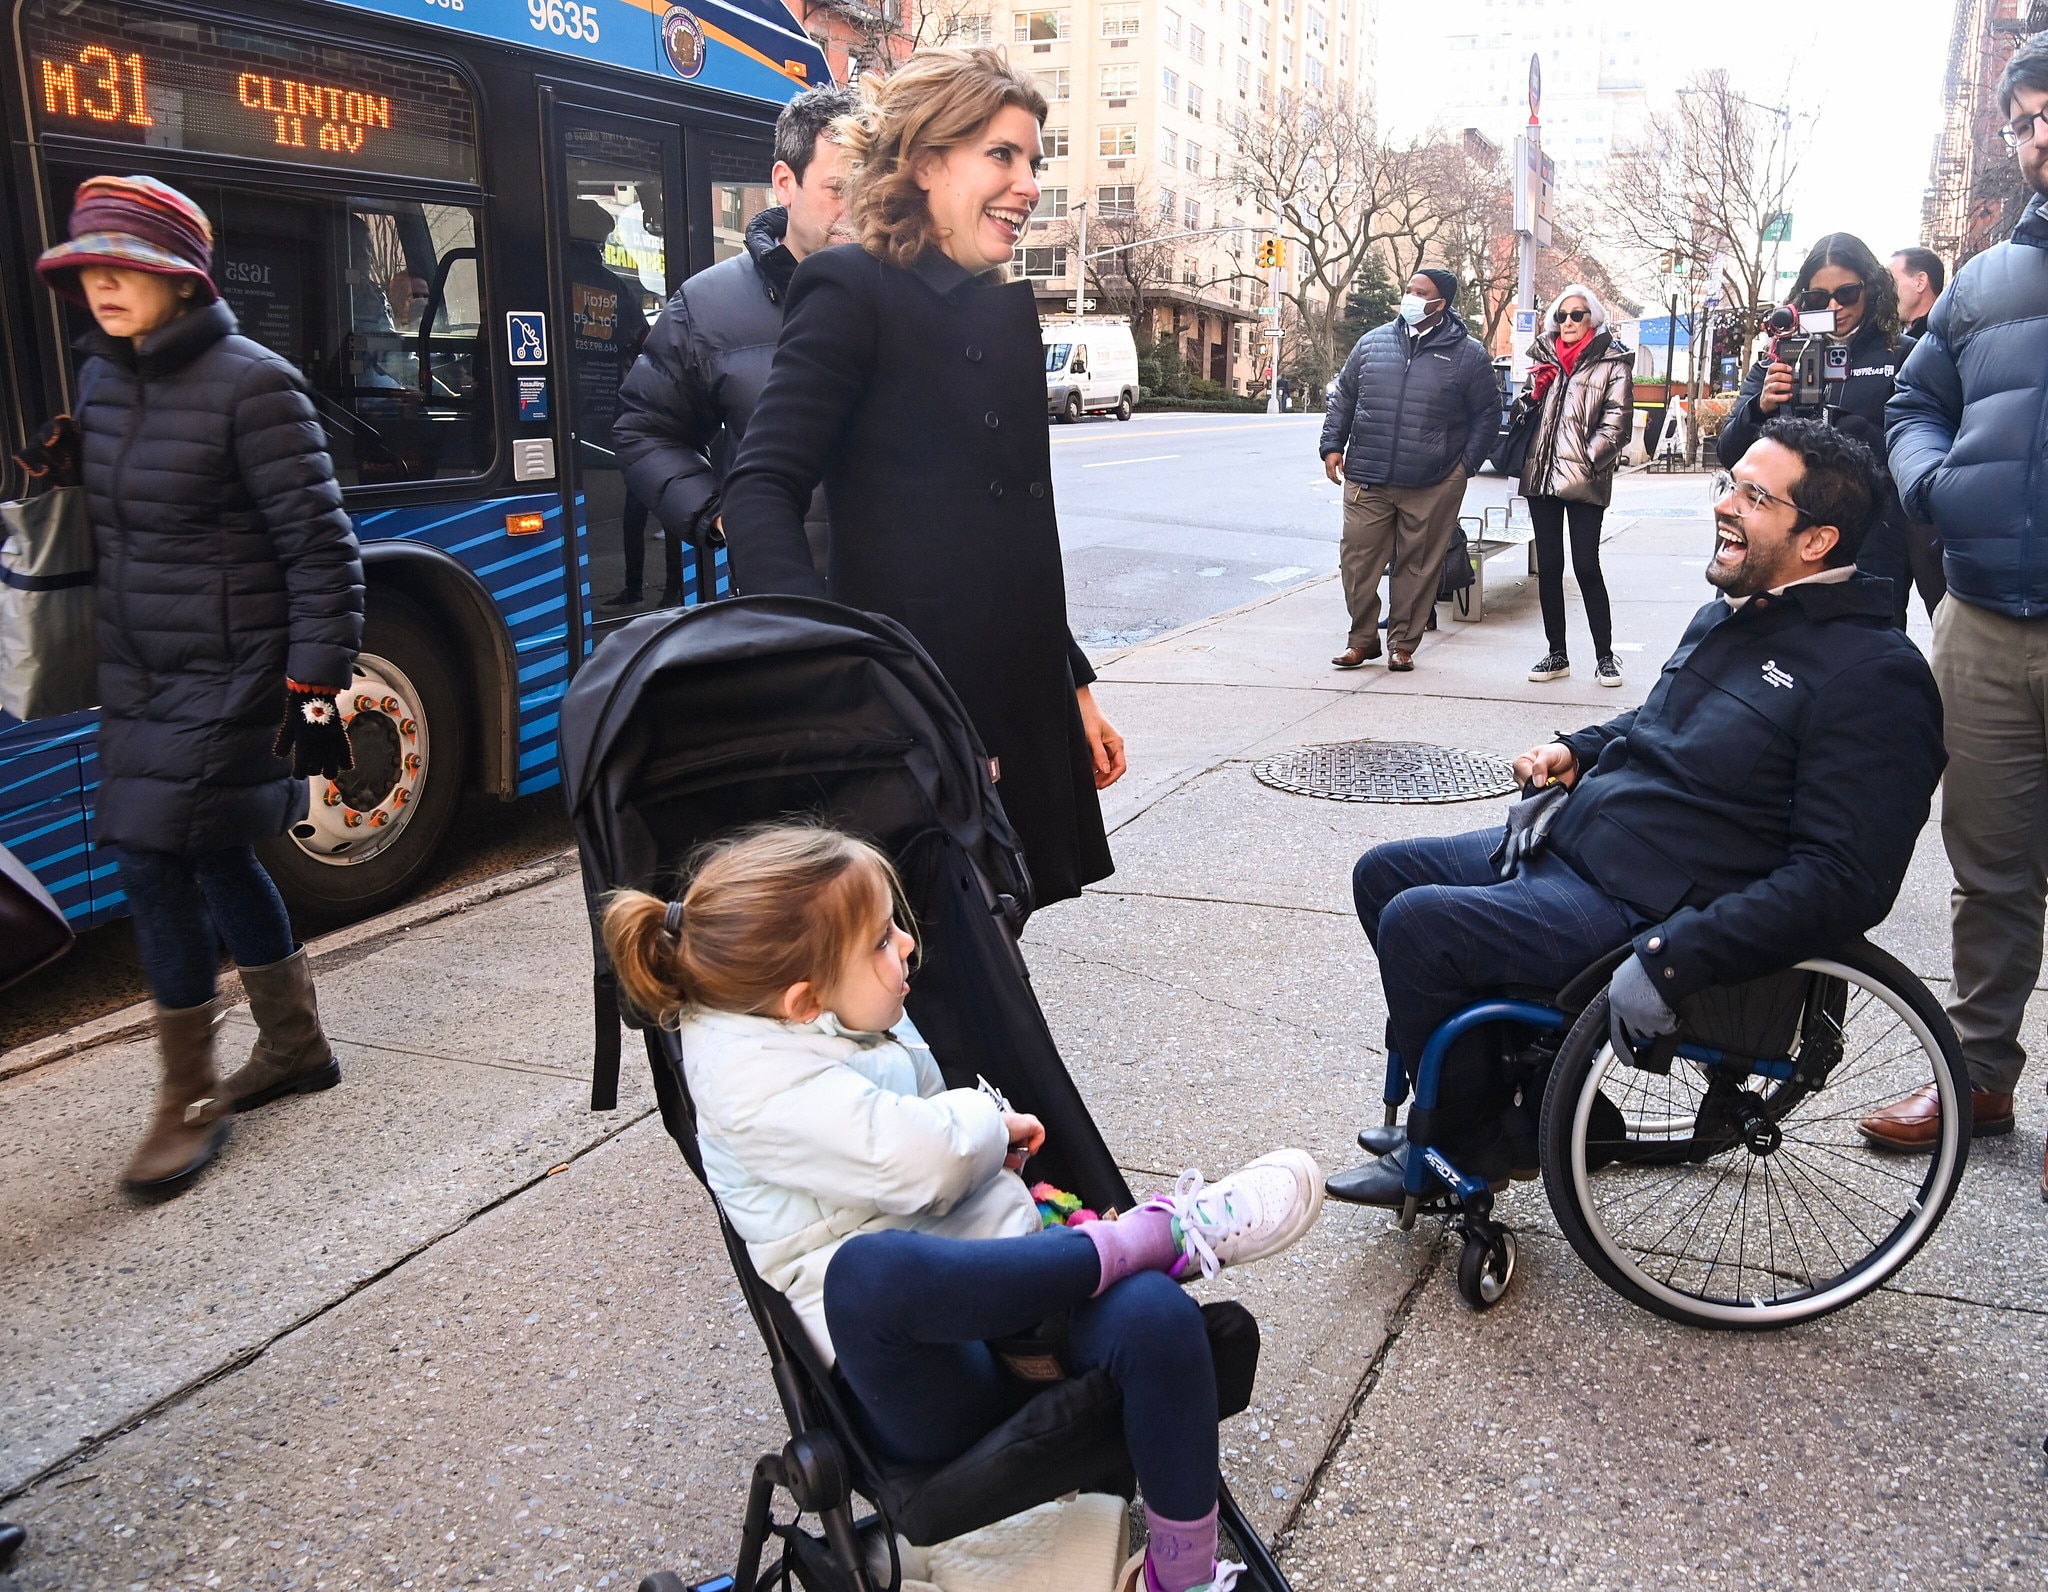 The Metropolitan Transportation Authority (MTA) today announced a significant expansion of the citywide open stroller pilot program to additional buses serving all five boroughs